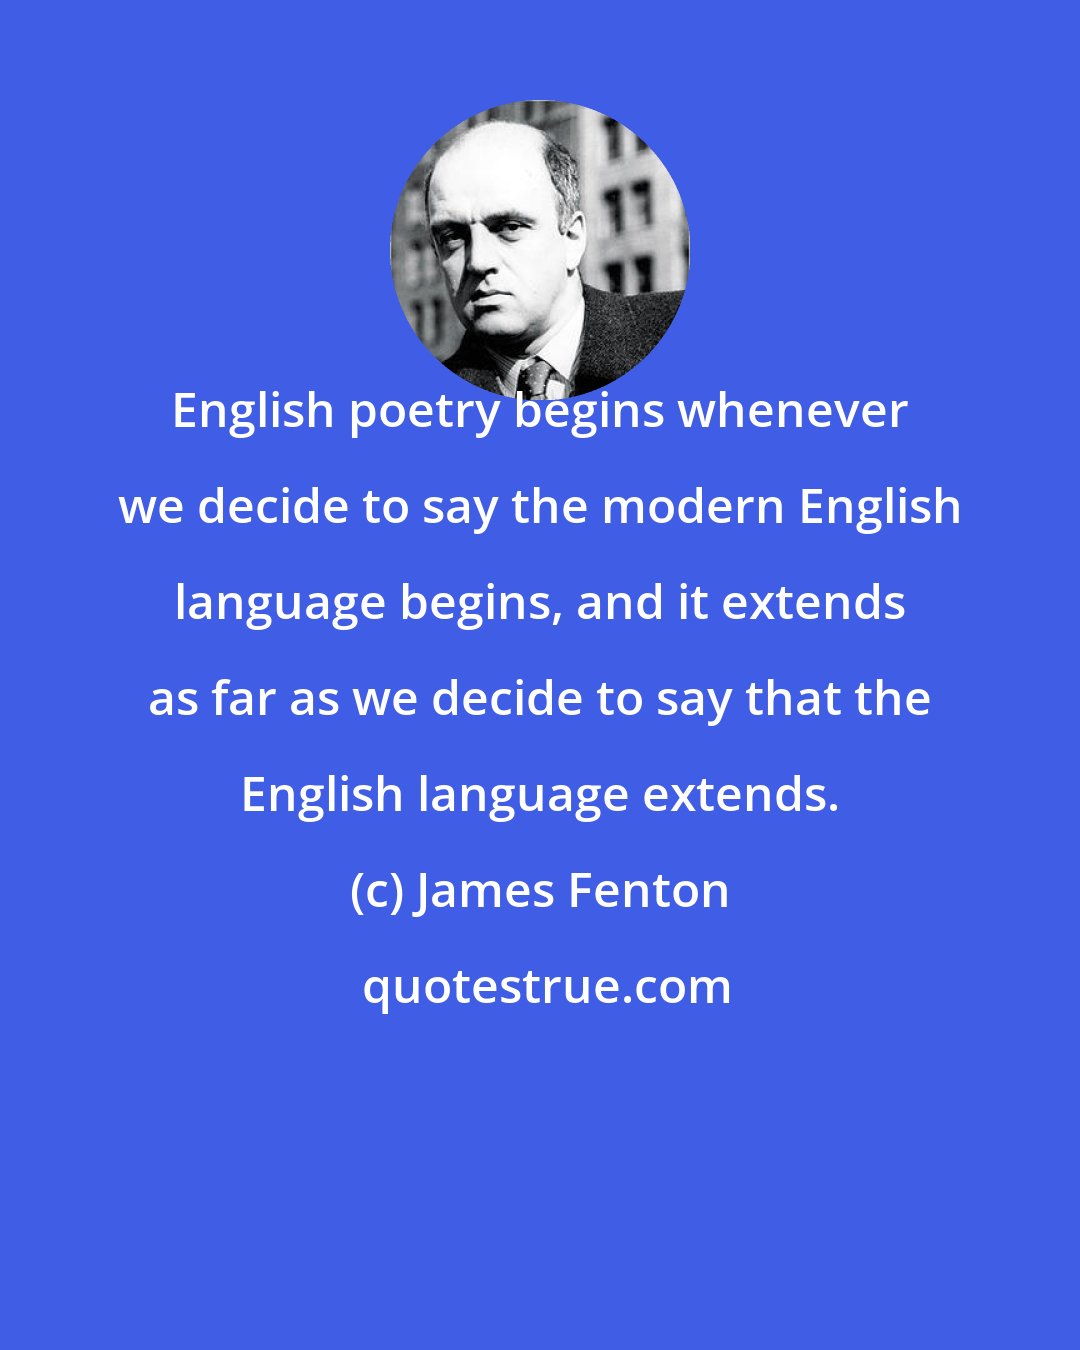 James Fenton: English poetry begins whenever we decide to say the modern English language begins, and it extends as far as we decide to say that the English language extends.